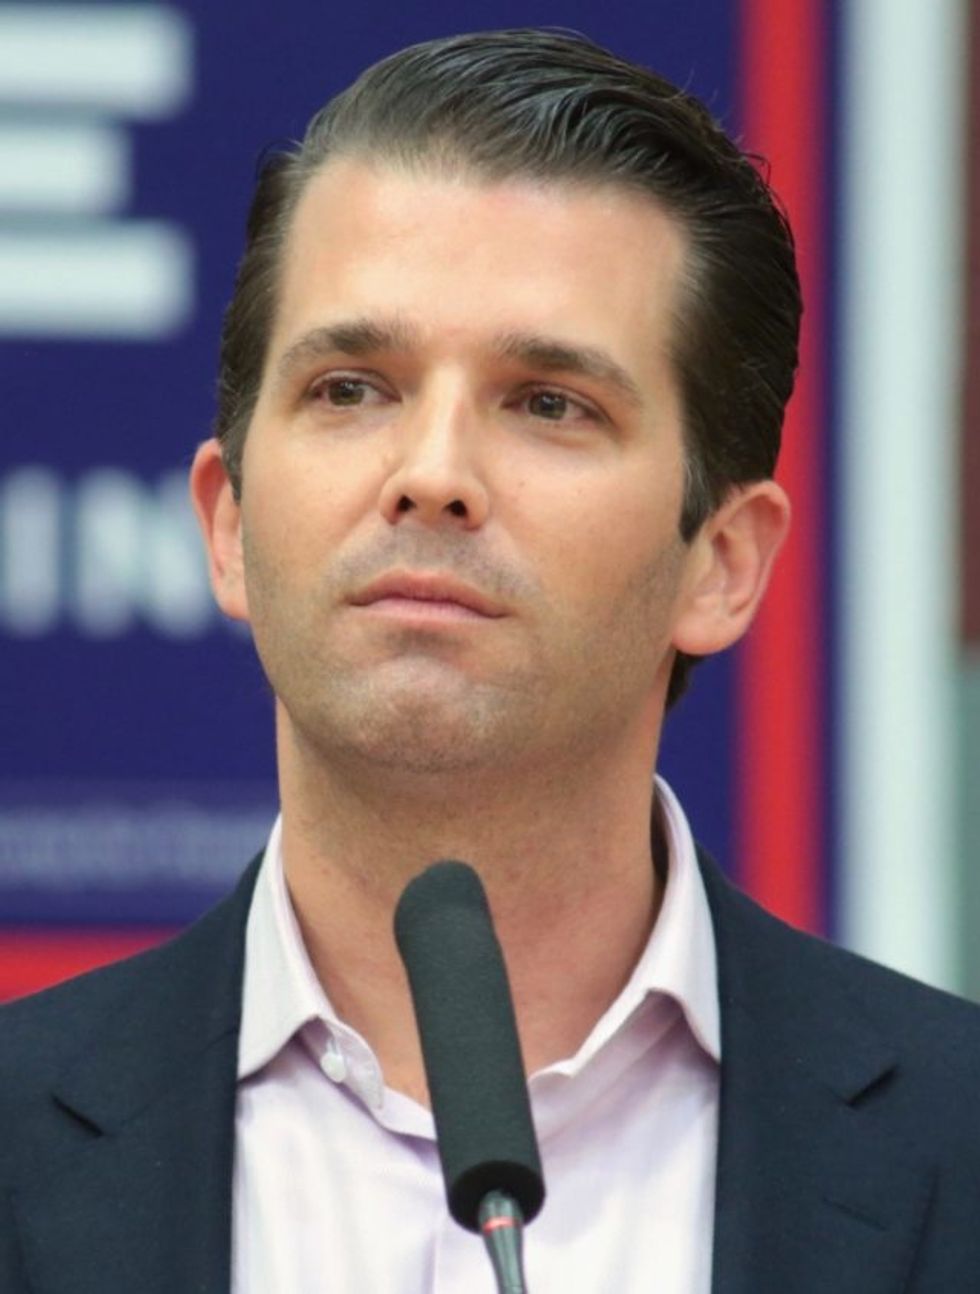 Don Jr. Is Giving Speeches For $100,000 A Pop